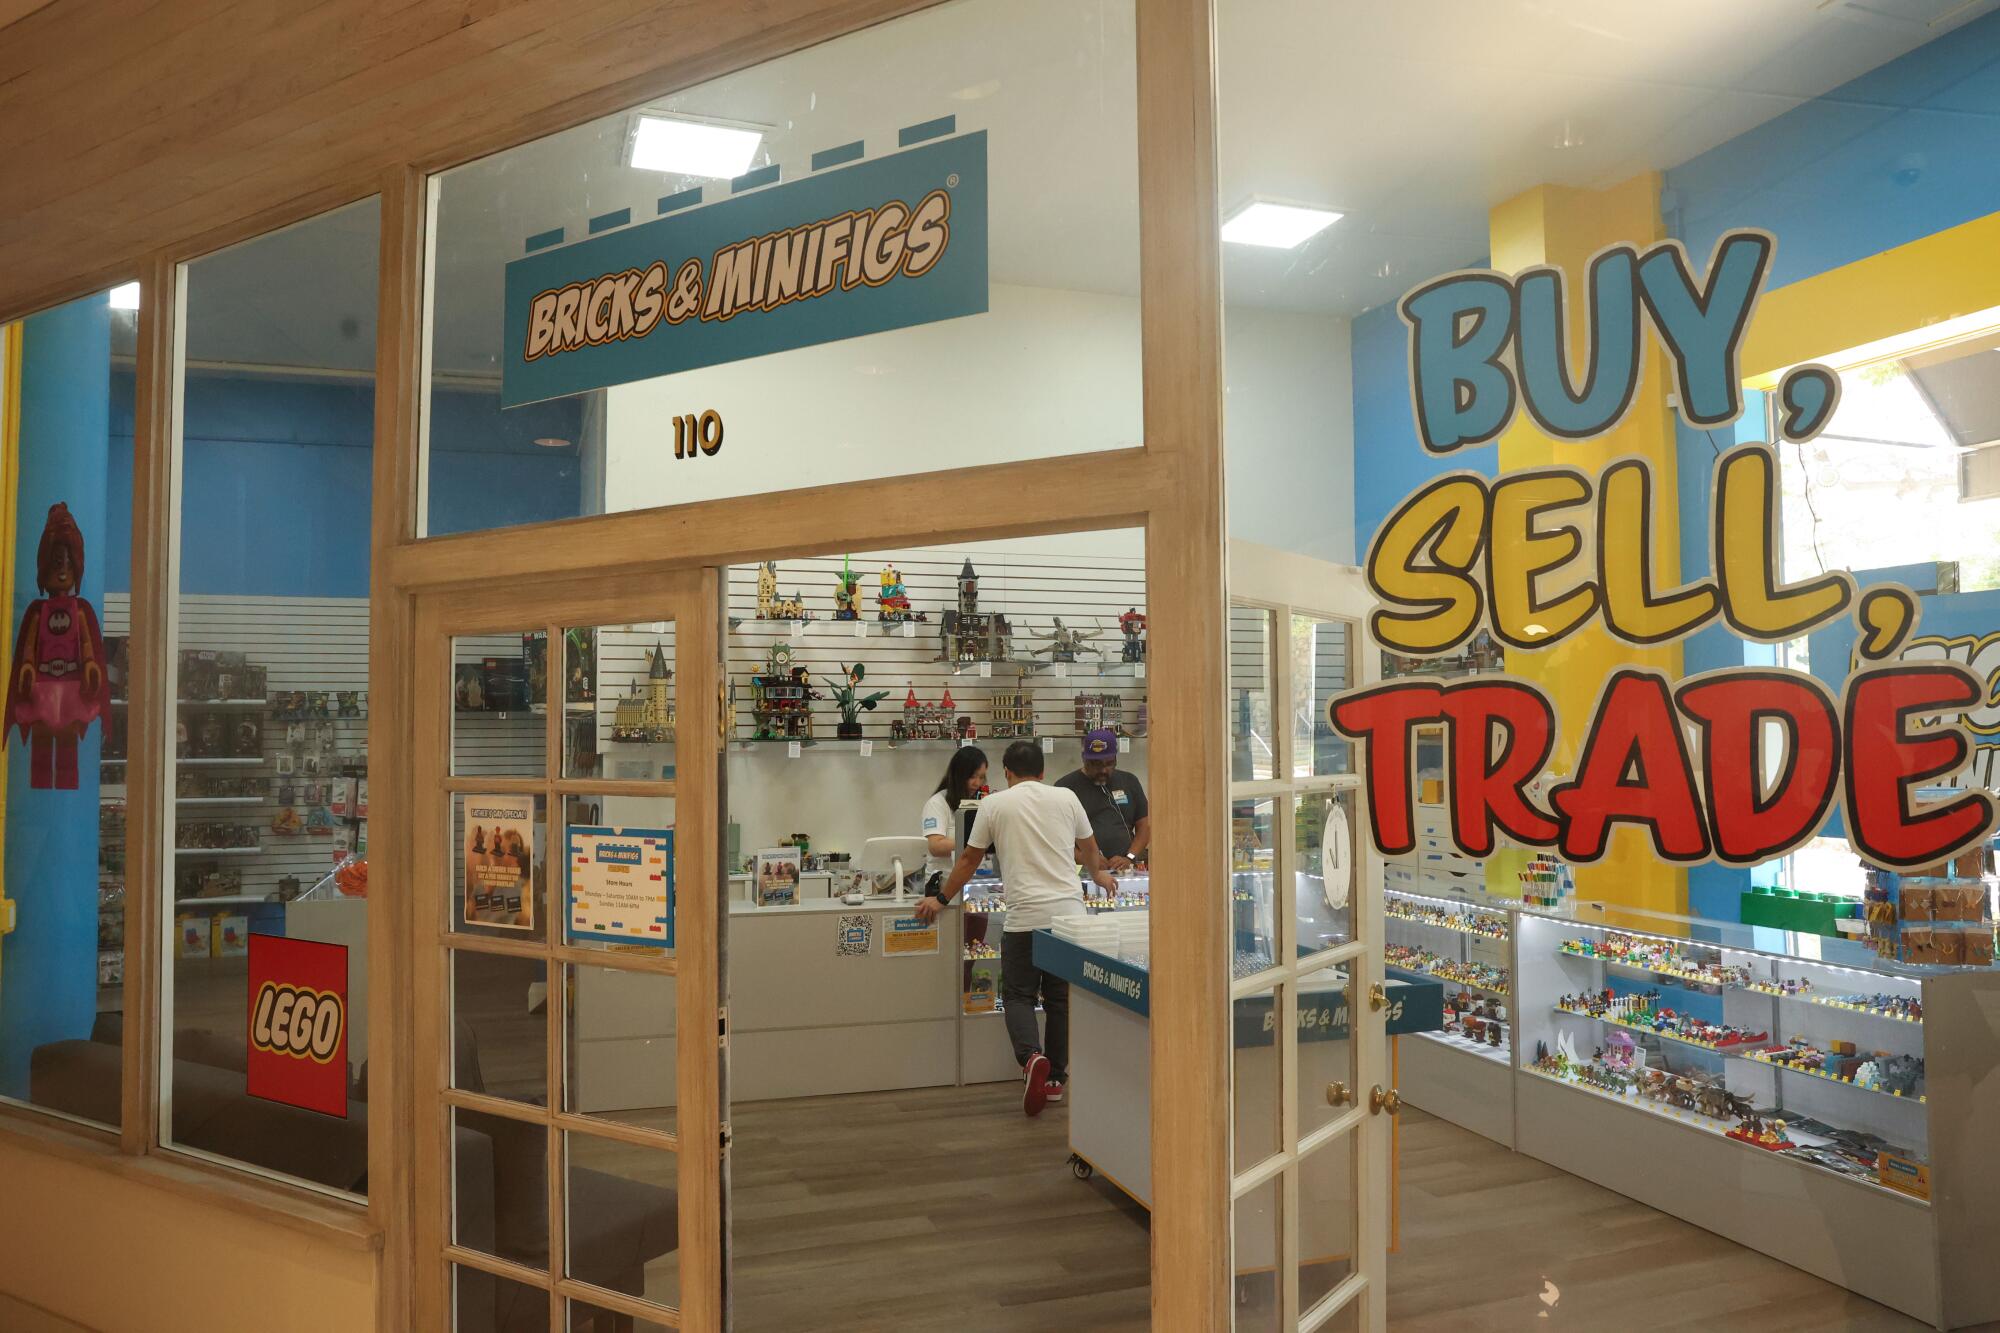 A storefront with windowed doors and windows labeled "Bricks & Minifigs" and "Buy, Sell, Trade"